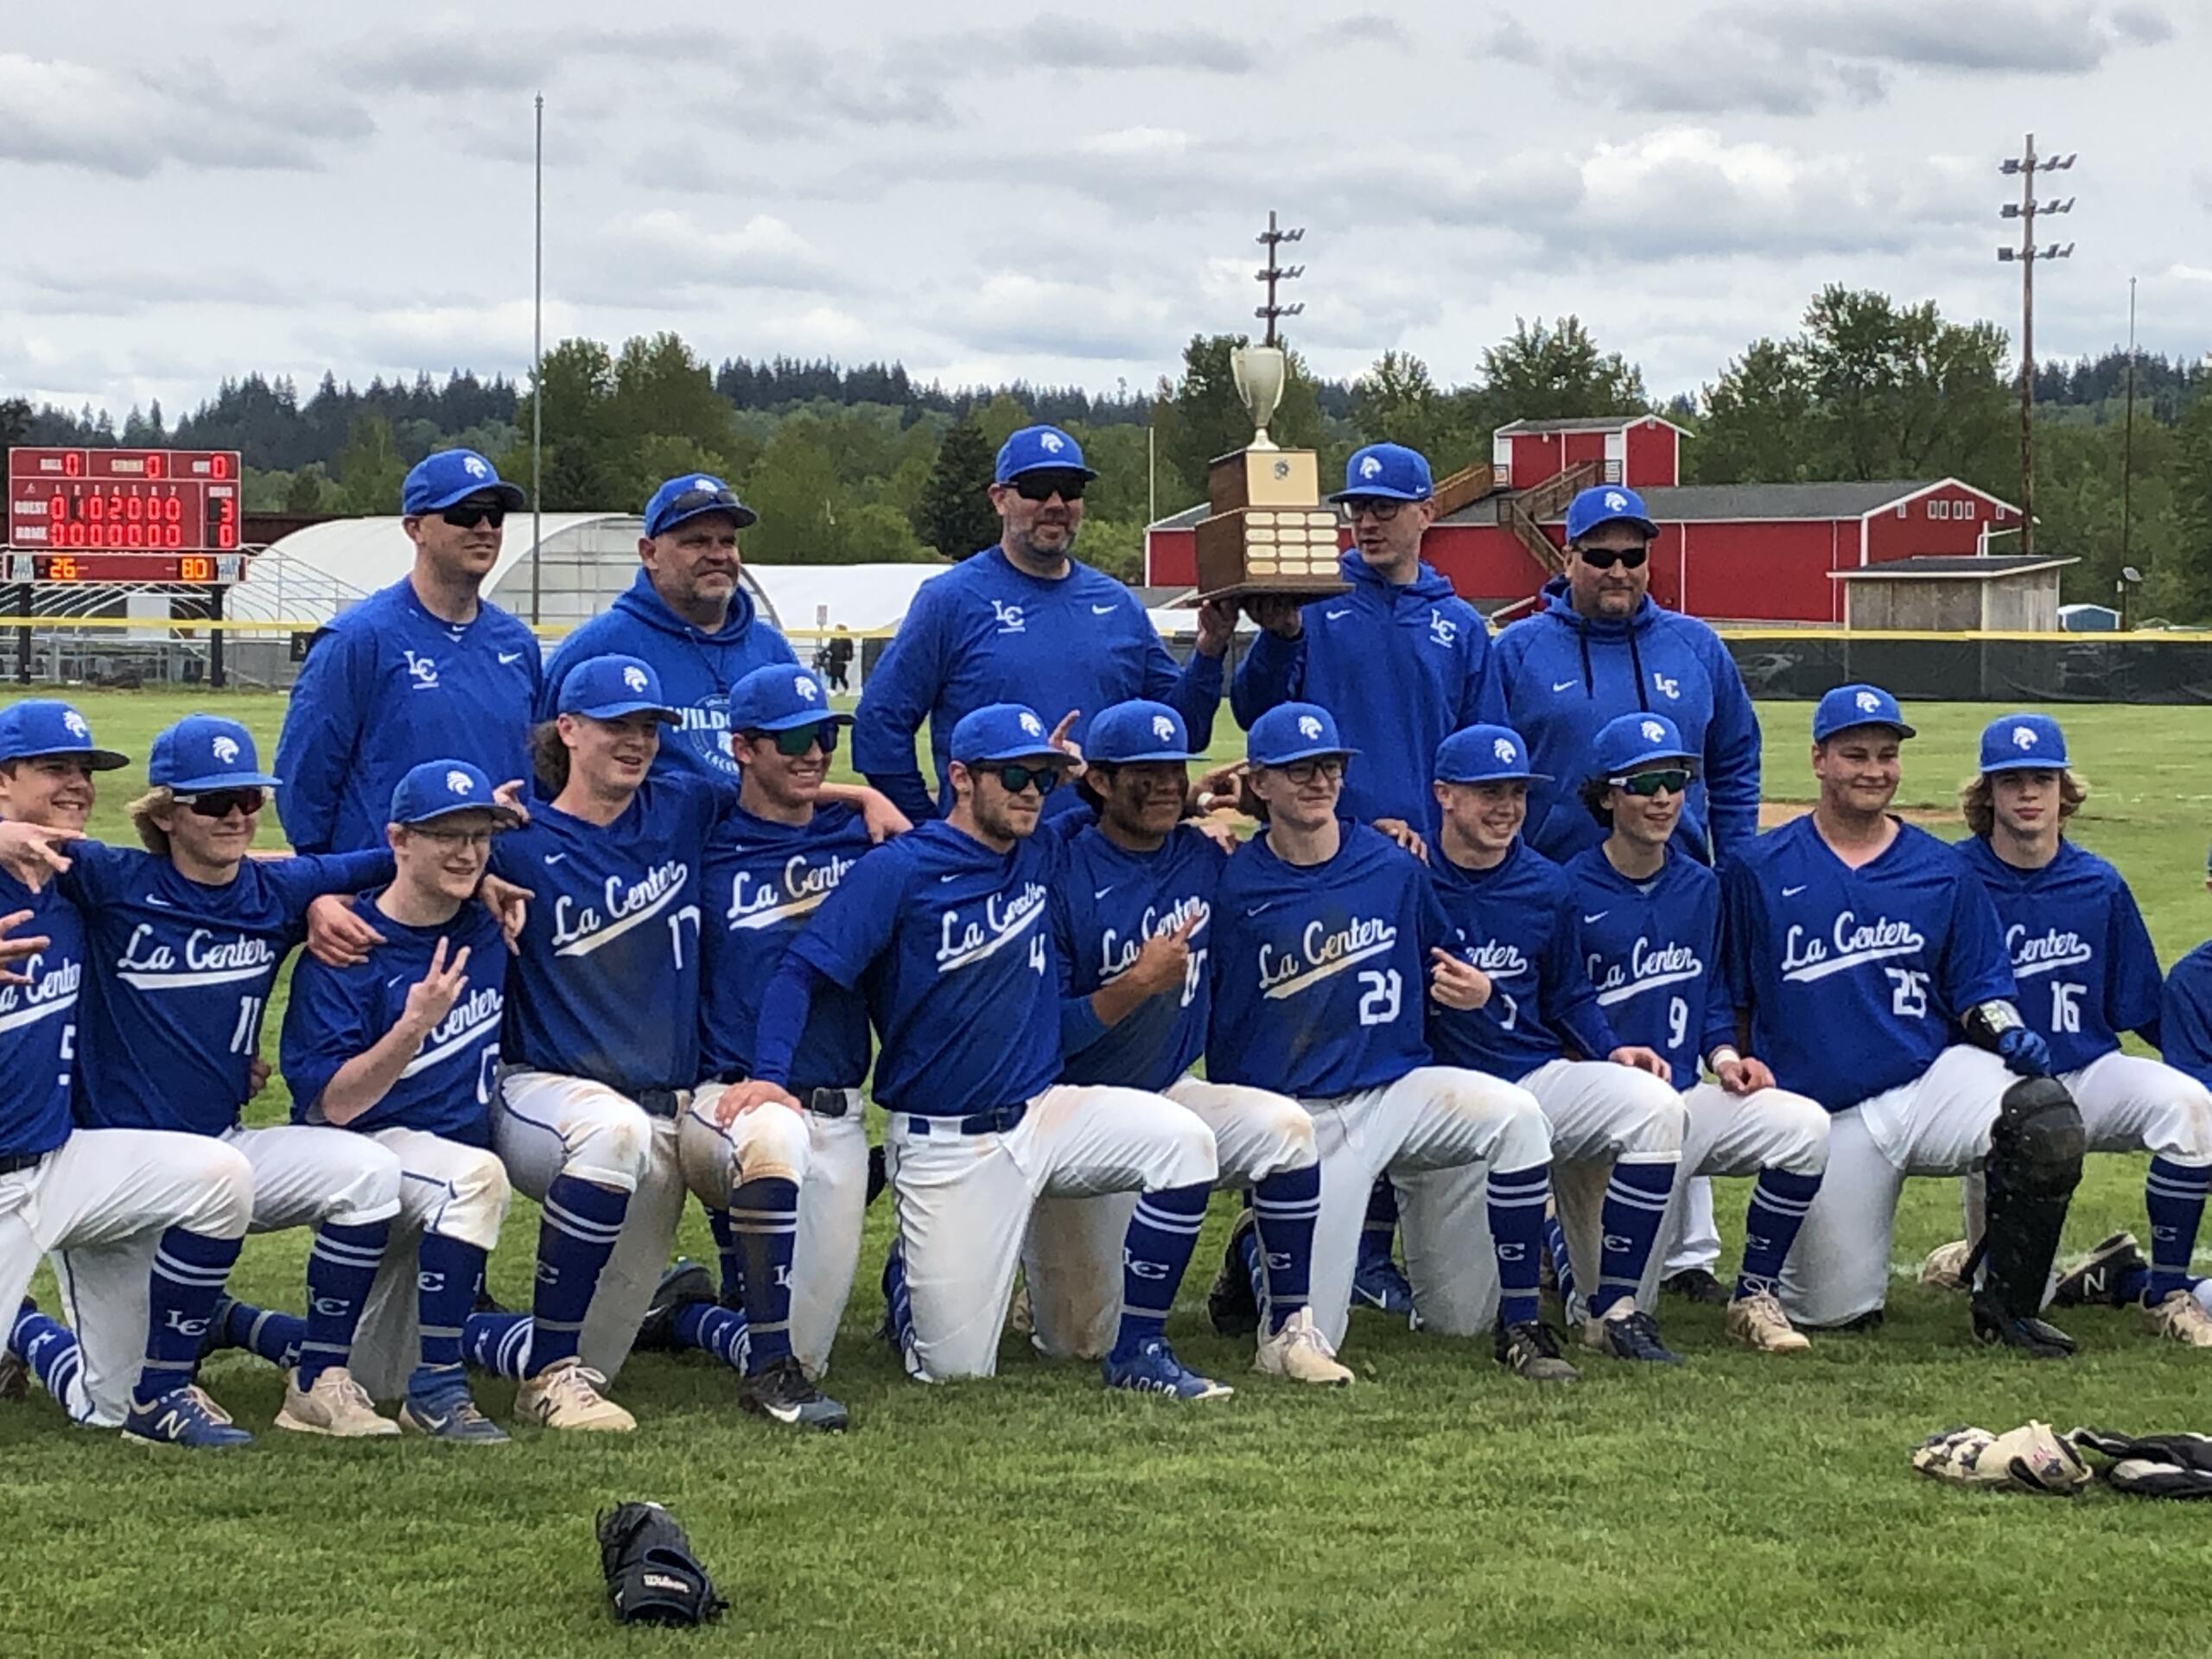 The La Center baseball team poses with the district championship trophy after beating Elma 3-0 in the championship game on Friday at Castle Rock High School.